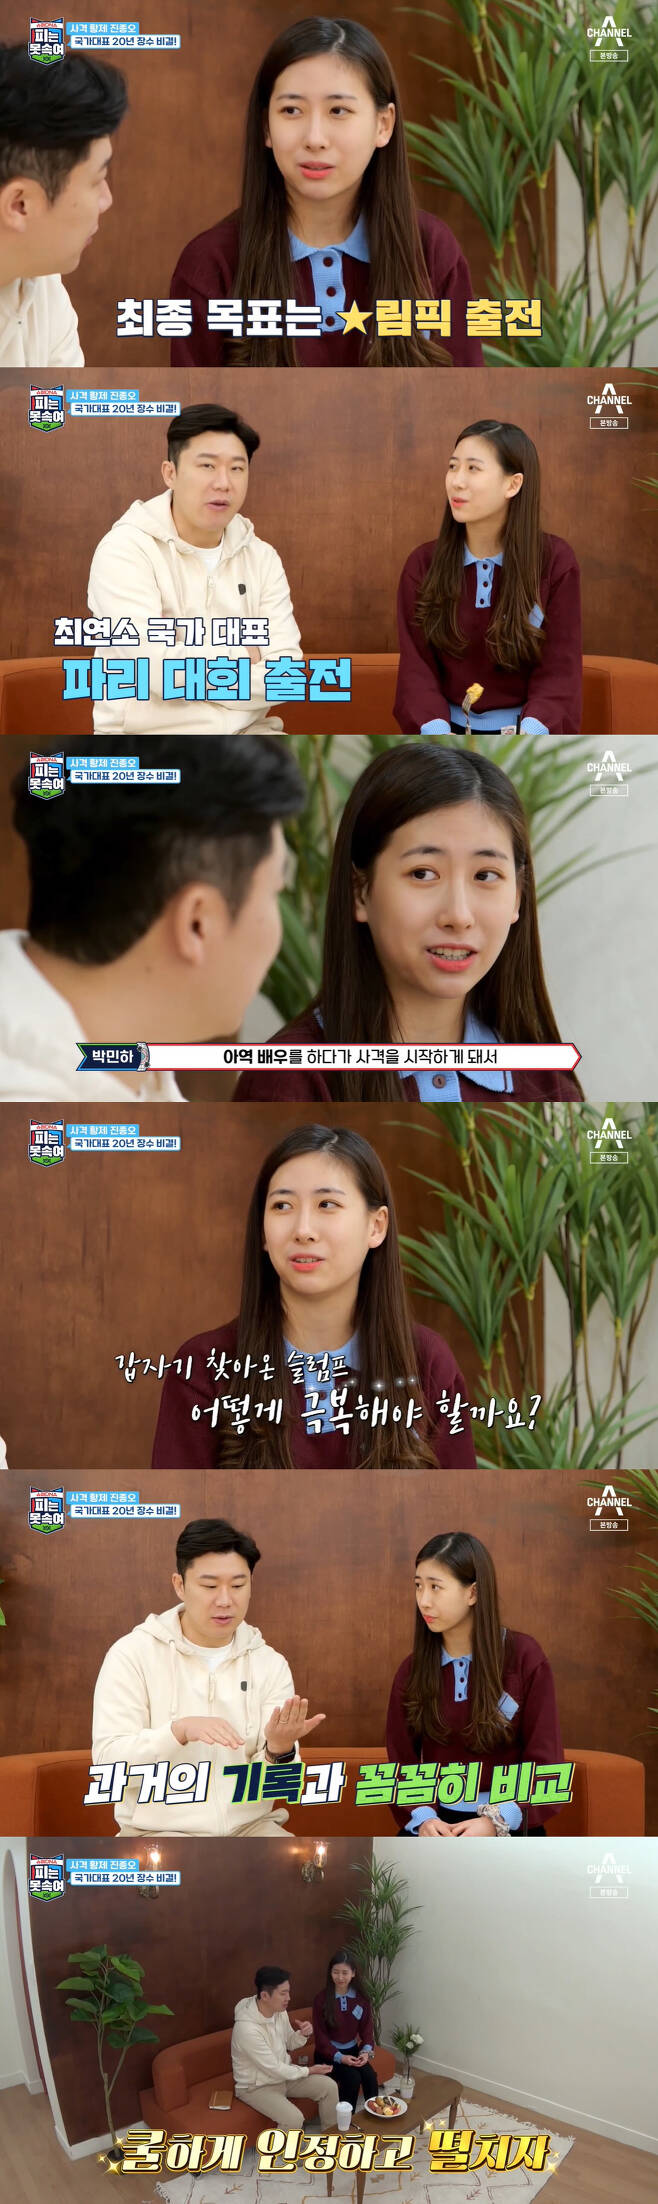 Broadcaster Park Chan-mins daughter Park Min-ha met former national shooter Jin Jong-oh.In the channel A entertainment program Super DNA blood is not cheating broadcasted on the 14th, Park Min-ha received a one-piece intel lesson from Jin Jong-oh.Park Min-ha went somewhere with Park Chan-min, saying, I have a special class. Then there was Jin Jong-oh.Jin Jong-oh is the most medalist in the Korean shooting world, who has played five times in the Olympics for 20 years as a national representative.Park Min-ha said, You are a great senior and you have won many medals in my dream Olympics. It is a wonderful and honorable feeling to see entertainers.Jin Jong-oh said, I want to explain the selection process of the national team, although the main event is different.Park Min-ha said with a languid look, I am going to ask you a lot about the pistol, so I have a lot of questions about the pistol.Park Min-ha started shooting with a pistol, not the usual rifle, and as Jin Jong-ohs honey tips were added, his skills quickly increased and he scored 10 points in three challenges.Jin Jong-oh praised it, calling it a born-on-the-go DNA.Jin Jong-oh added to Park Min-ha that I need my own mental management and I am sensitive to external factors (in the game), so it will be helpful to make obstacles during training.He then used the actual vuvuzela to train his concentration. Park Min-ha scored 10.2 points in the interfering maneuver and received applause.After the training, Park Min-ha said, I was funny at the time, but when I was training, I thought that I could do well regardless of the environment even if I went to a big tournament later.Park Chan-min said, I wanted to be a father because I was interested in shooting, but I feel relieved that it was a great motivation.There was also time for Jin Jong-oh and Park Min-ha alone, who asked, Usually athletes are the goal of Olympic gold medal, but what is Minhas goal?Park Min-ha said, The goal is to compete in the world junior championships and the final goal is to participate in the Olympics. I want to go to the Paris Olympics as the youngest national team.Jin Jong-oh gave the courage, saying, I think theres enough possibility - Im going!Park Min-ha confessed to the slump, saying, Until recently, the practice record was good. I had a record of the first place in the high school, but the record fell in the morning.I think people are interested in shooting while playing a child actor, and it seems to be a burden. How to overcome it.Jin Jong-oh wrote a training log, advised me to carefully record the training contents, and to forget the negative things.Lee Dong-guks brother and sister visited the screen golf course. Jae-a, who had undergone surgery due to a knee injury, said, I am tired because I am not at home after surgery.I saw Jash, Sua, SuA, Cyan playing golf, but he was so good. I do not want to be behind. A few moments later, Jash, Jaa (hereinafter Jasia), and Seolah, SuA, and Cyan (hereinafter Sulsudae) played golf battles.When the Jascia team won, Cyan showed tears. When Jasie threw a joke, Im sorry I was so good, Cyan, Cyan even buried his face in his clothes.